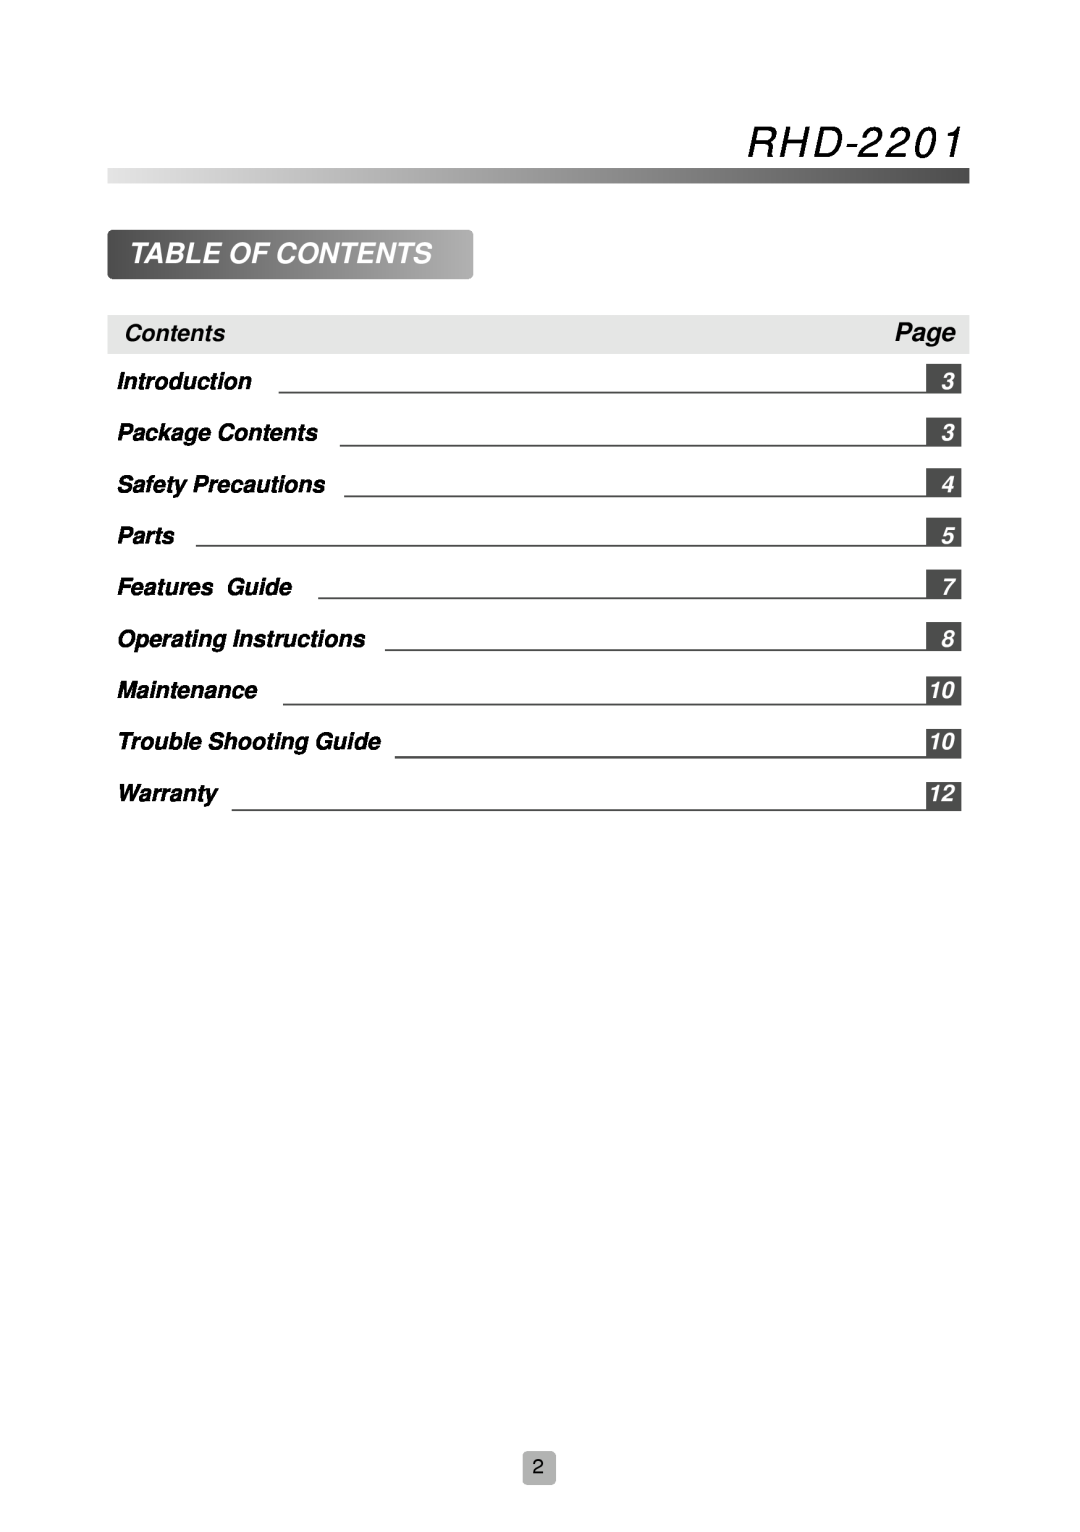 Royal Sovereign RHD-2201 owner manual Table Of Contents, Page 